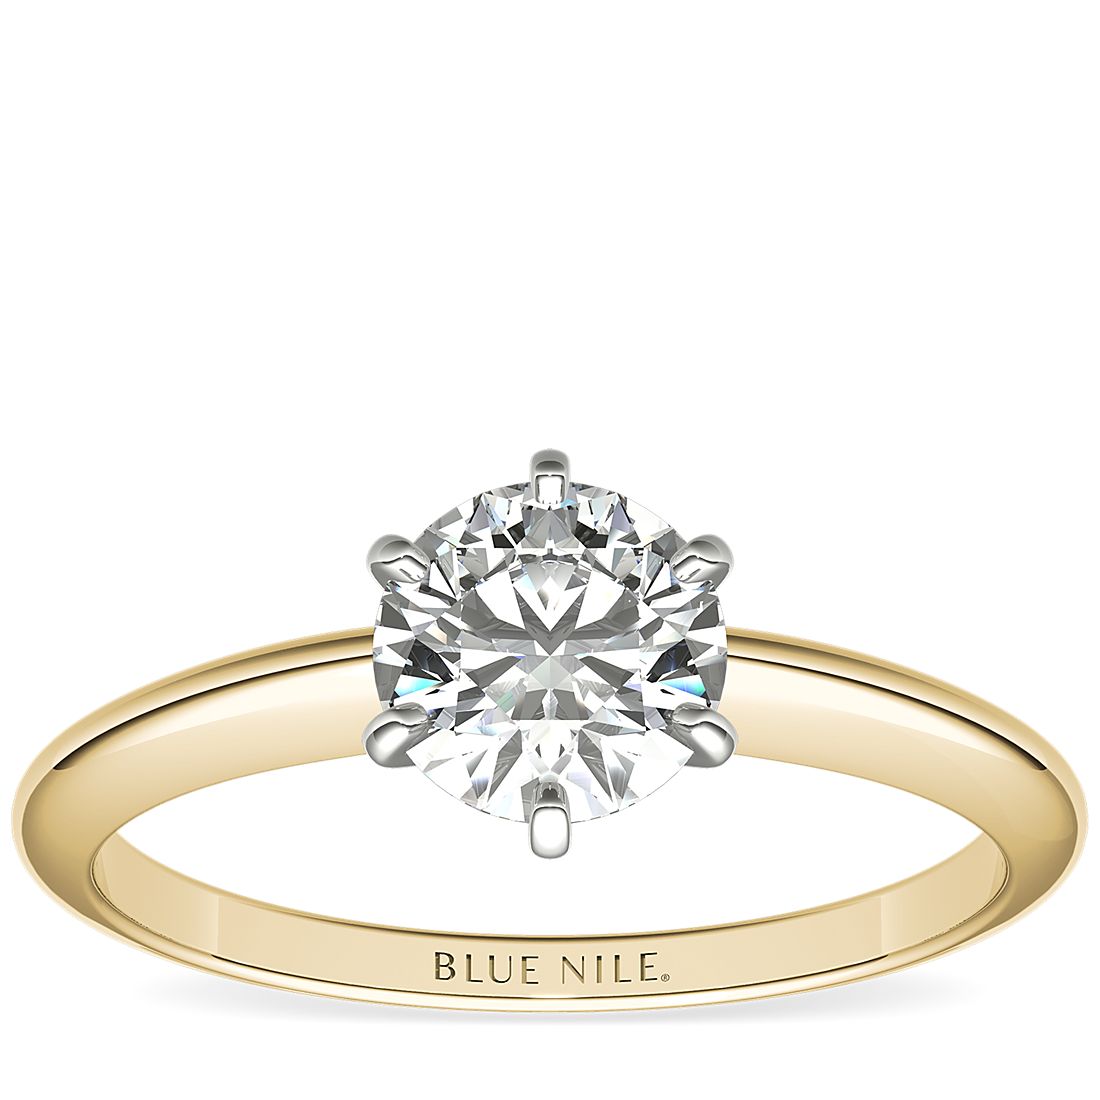 Classic Six-Prong Solitaire Engagement Ring in 18k Yellow Gold | Blue Nile